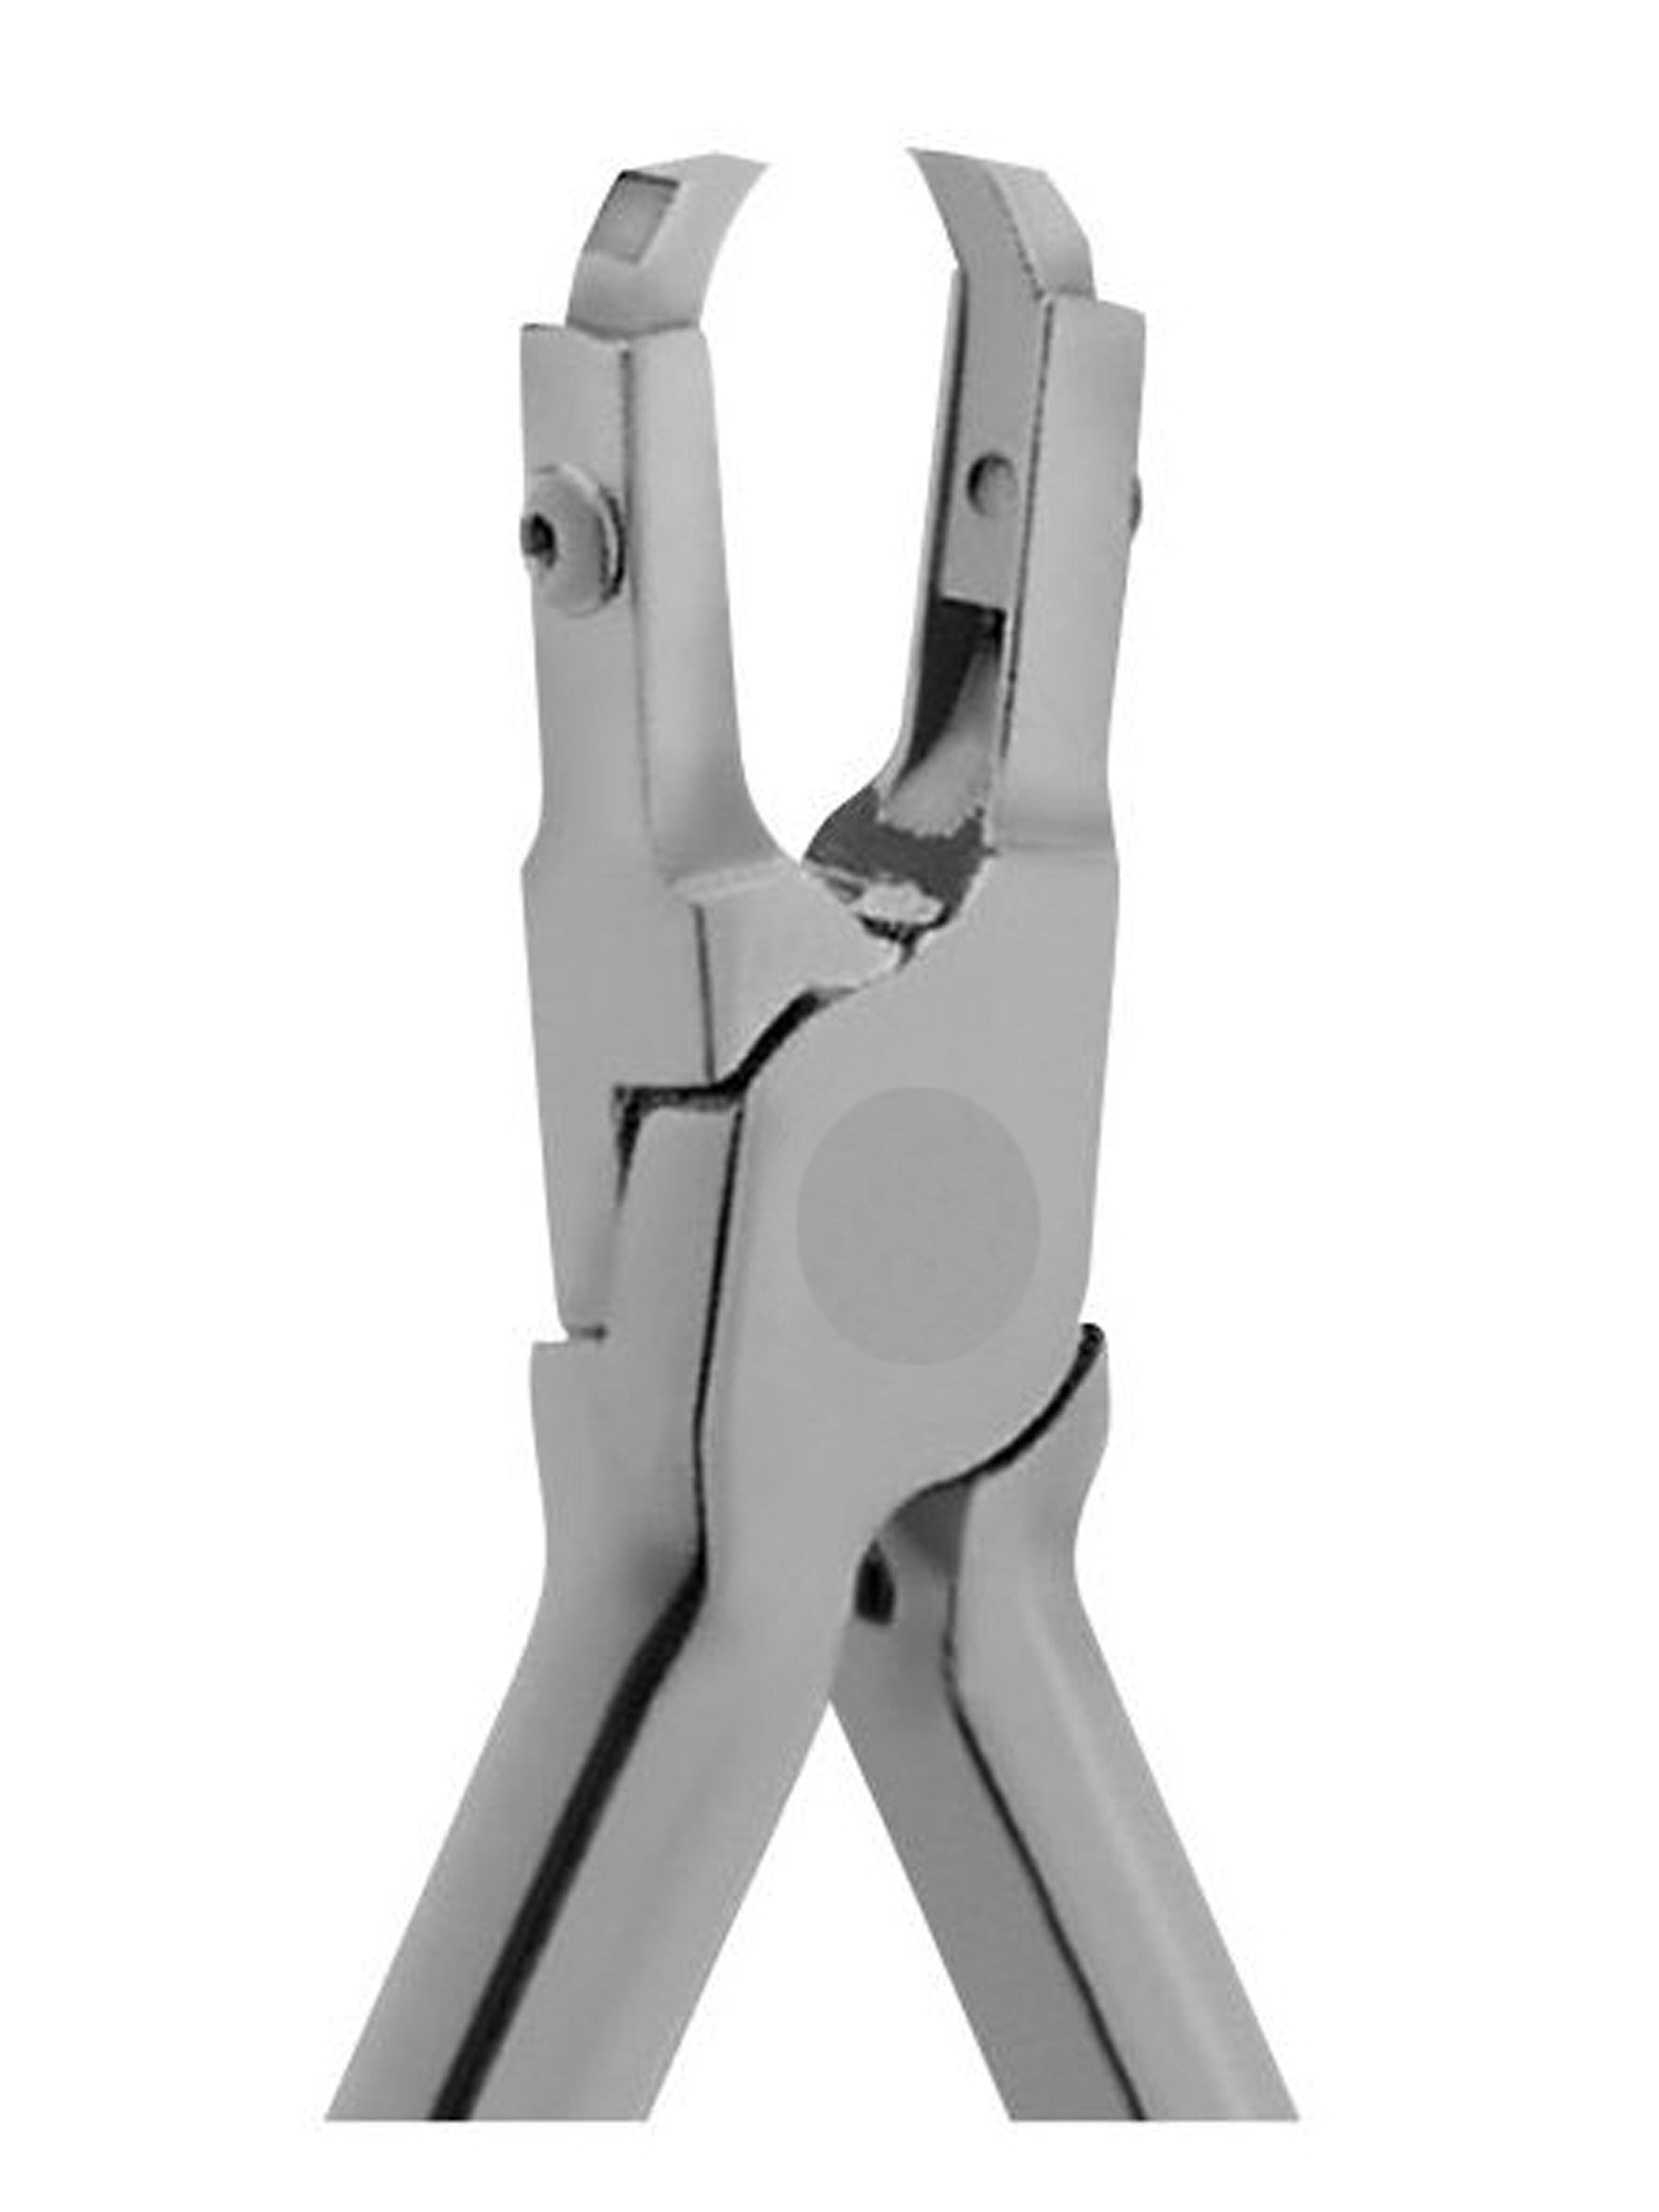 Orthodontic Pliers ,Direct Bonding Bracket and band removers